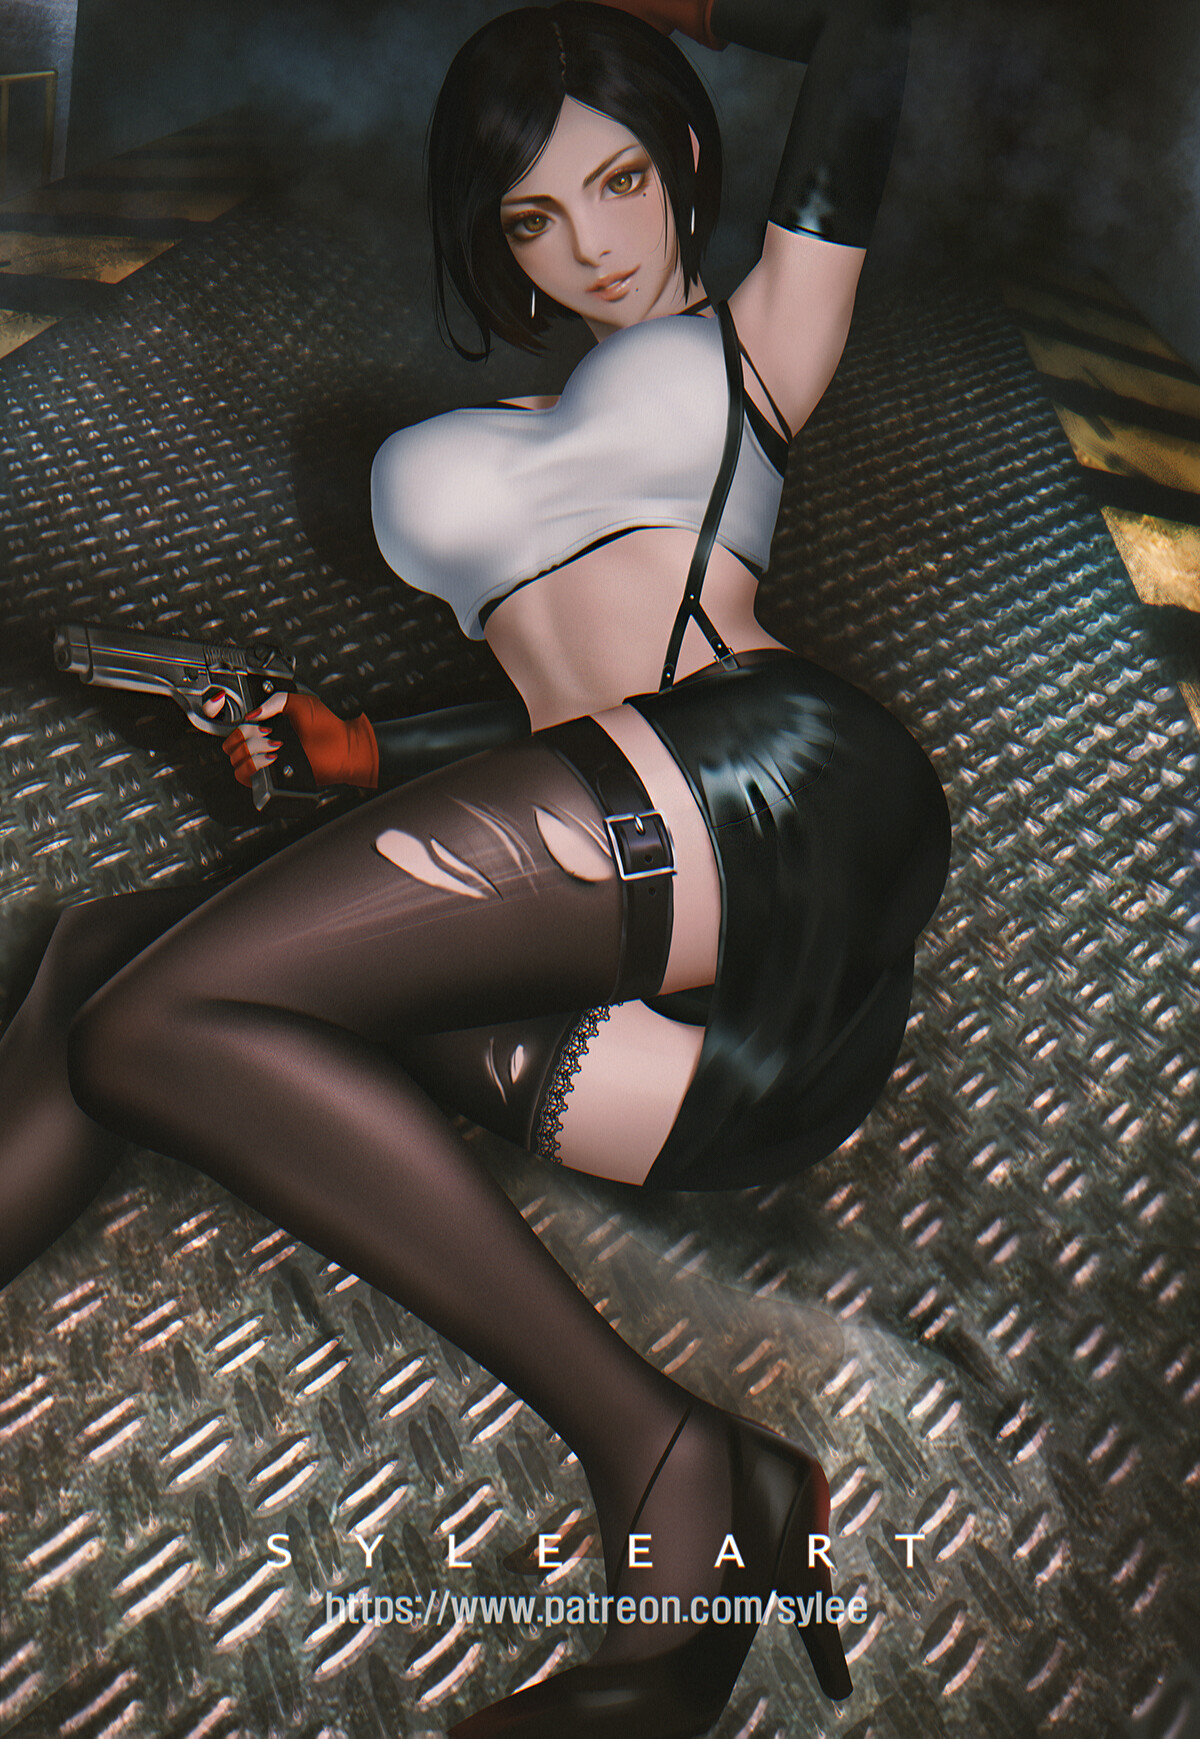 General 1200x1739 drawing women dark hair short hair tank top white clothing suspenders skirt tight Skirt black clothing on the floor weapon pistol thigh-highs belt stockings Ada Wong Tifa Lockhart miniskirt high heels torn clothes shoes panties girls with guns watermarked cosplay ass gun moles mole under eye gloves mole under mouth smiling parted lips lying on side Seungyoon Lee lying down